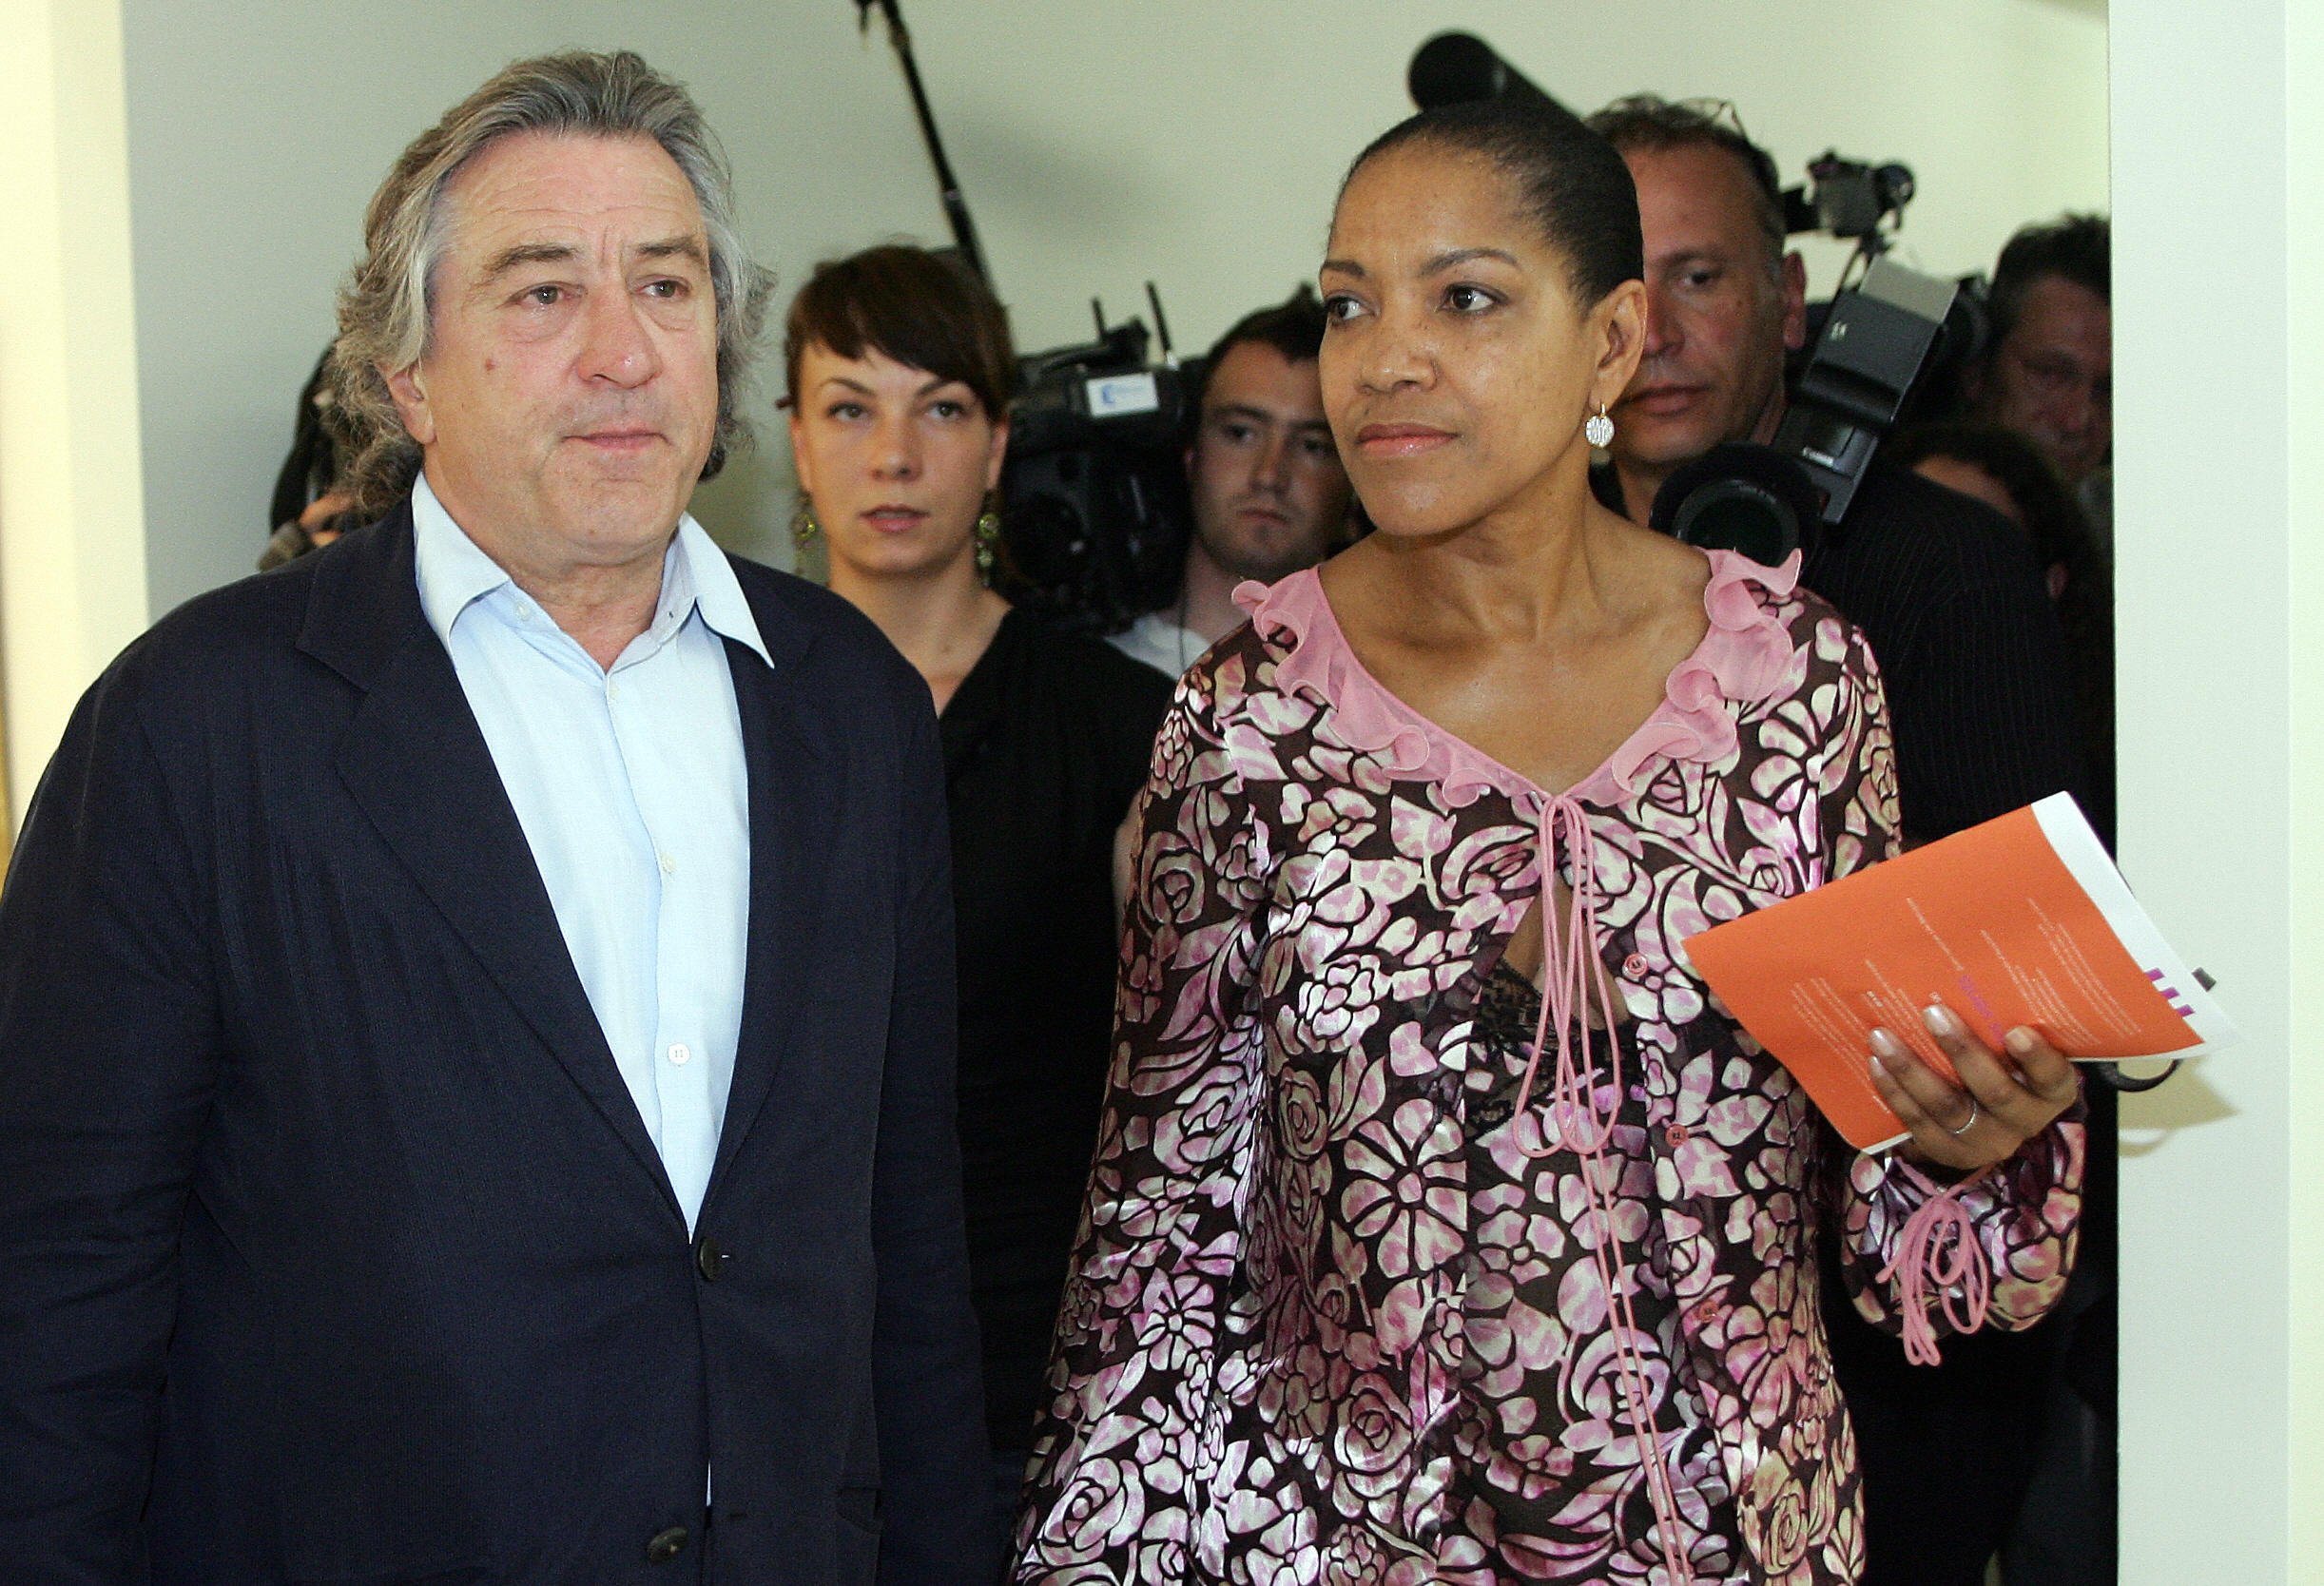 obert De Niro arrives with his wife for a press conference on his late father, Robert De Niro Senior (1922-1993), painting exhibition, 18 June 2005 in "La piscine" museum in Roubaix (North of France) | Source: Getty Images 